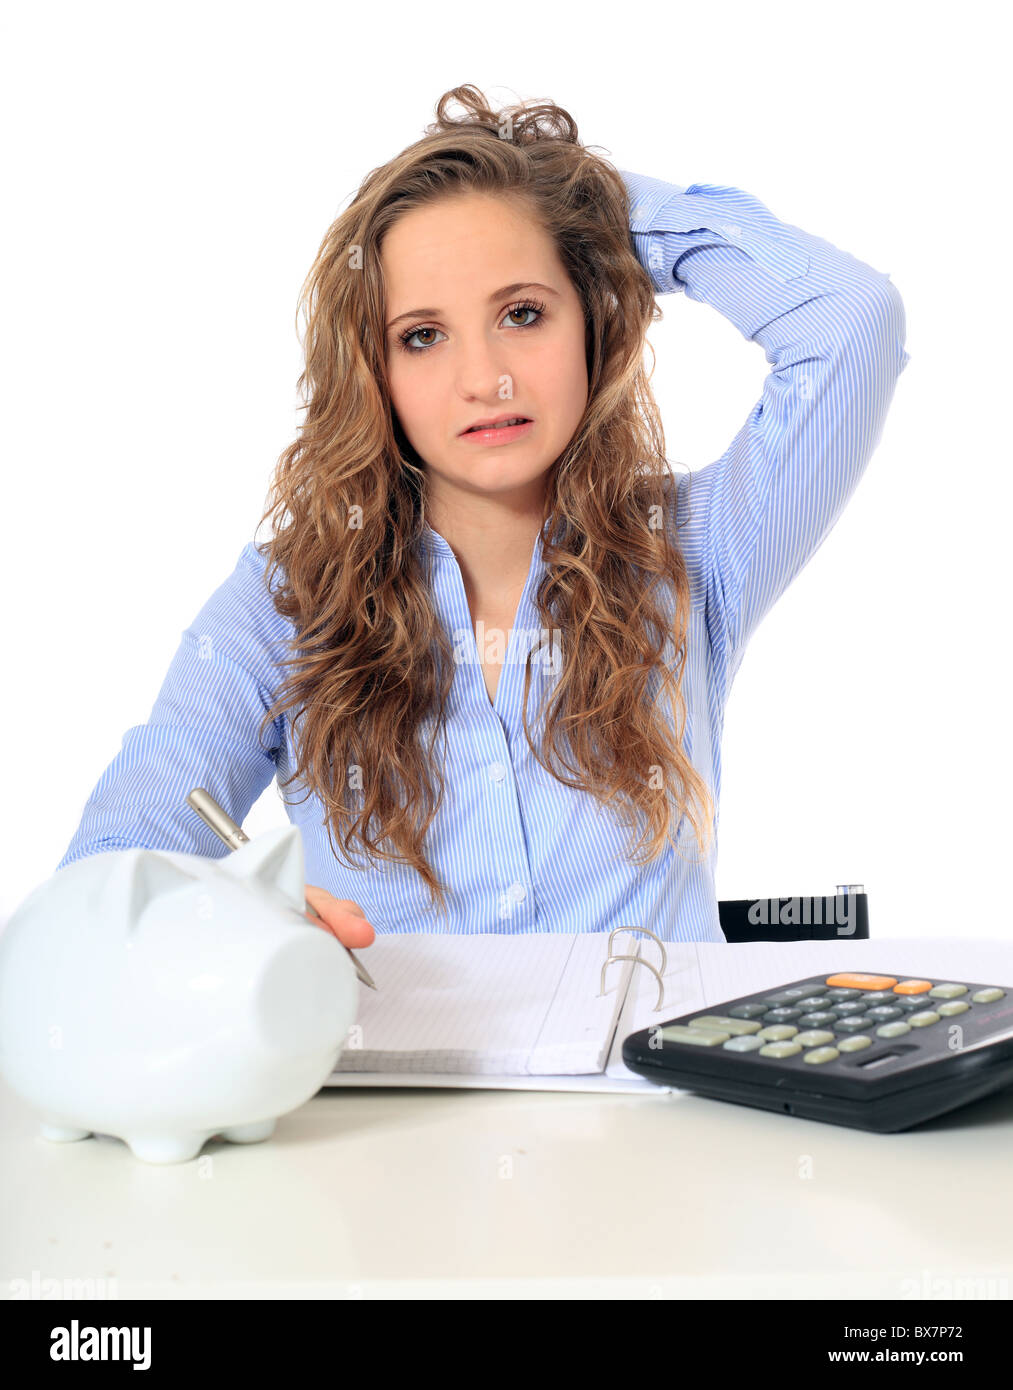 Portrait of a frustrated young girl doing her budgeting. All on white background. Stock Photo